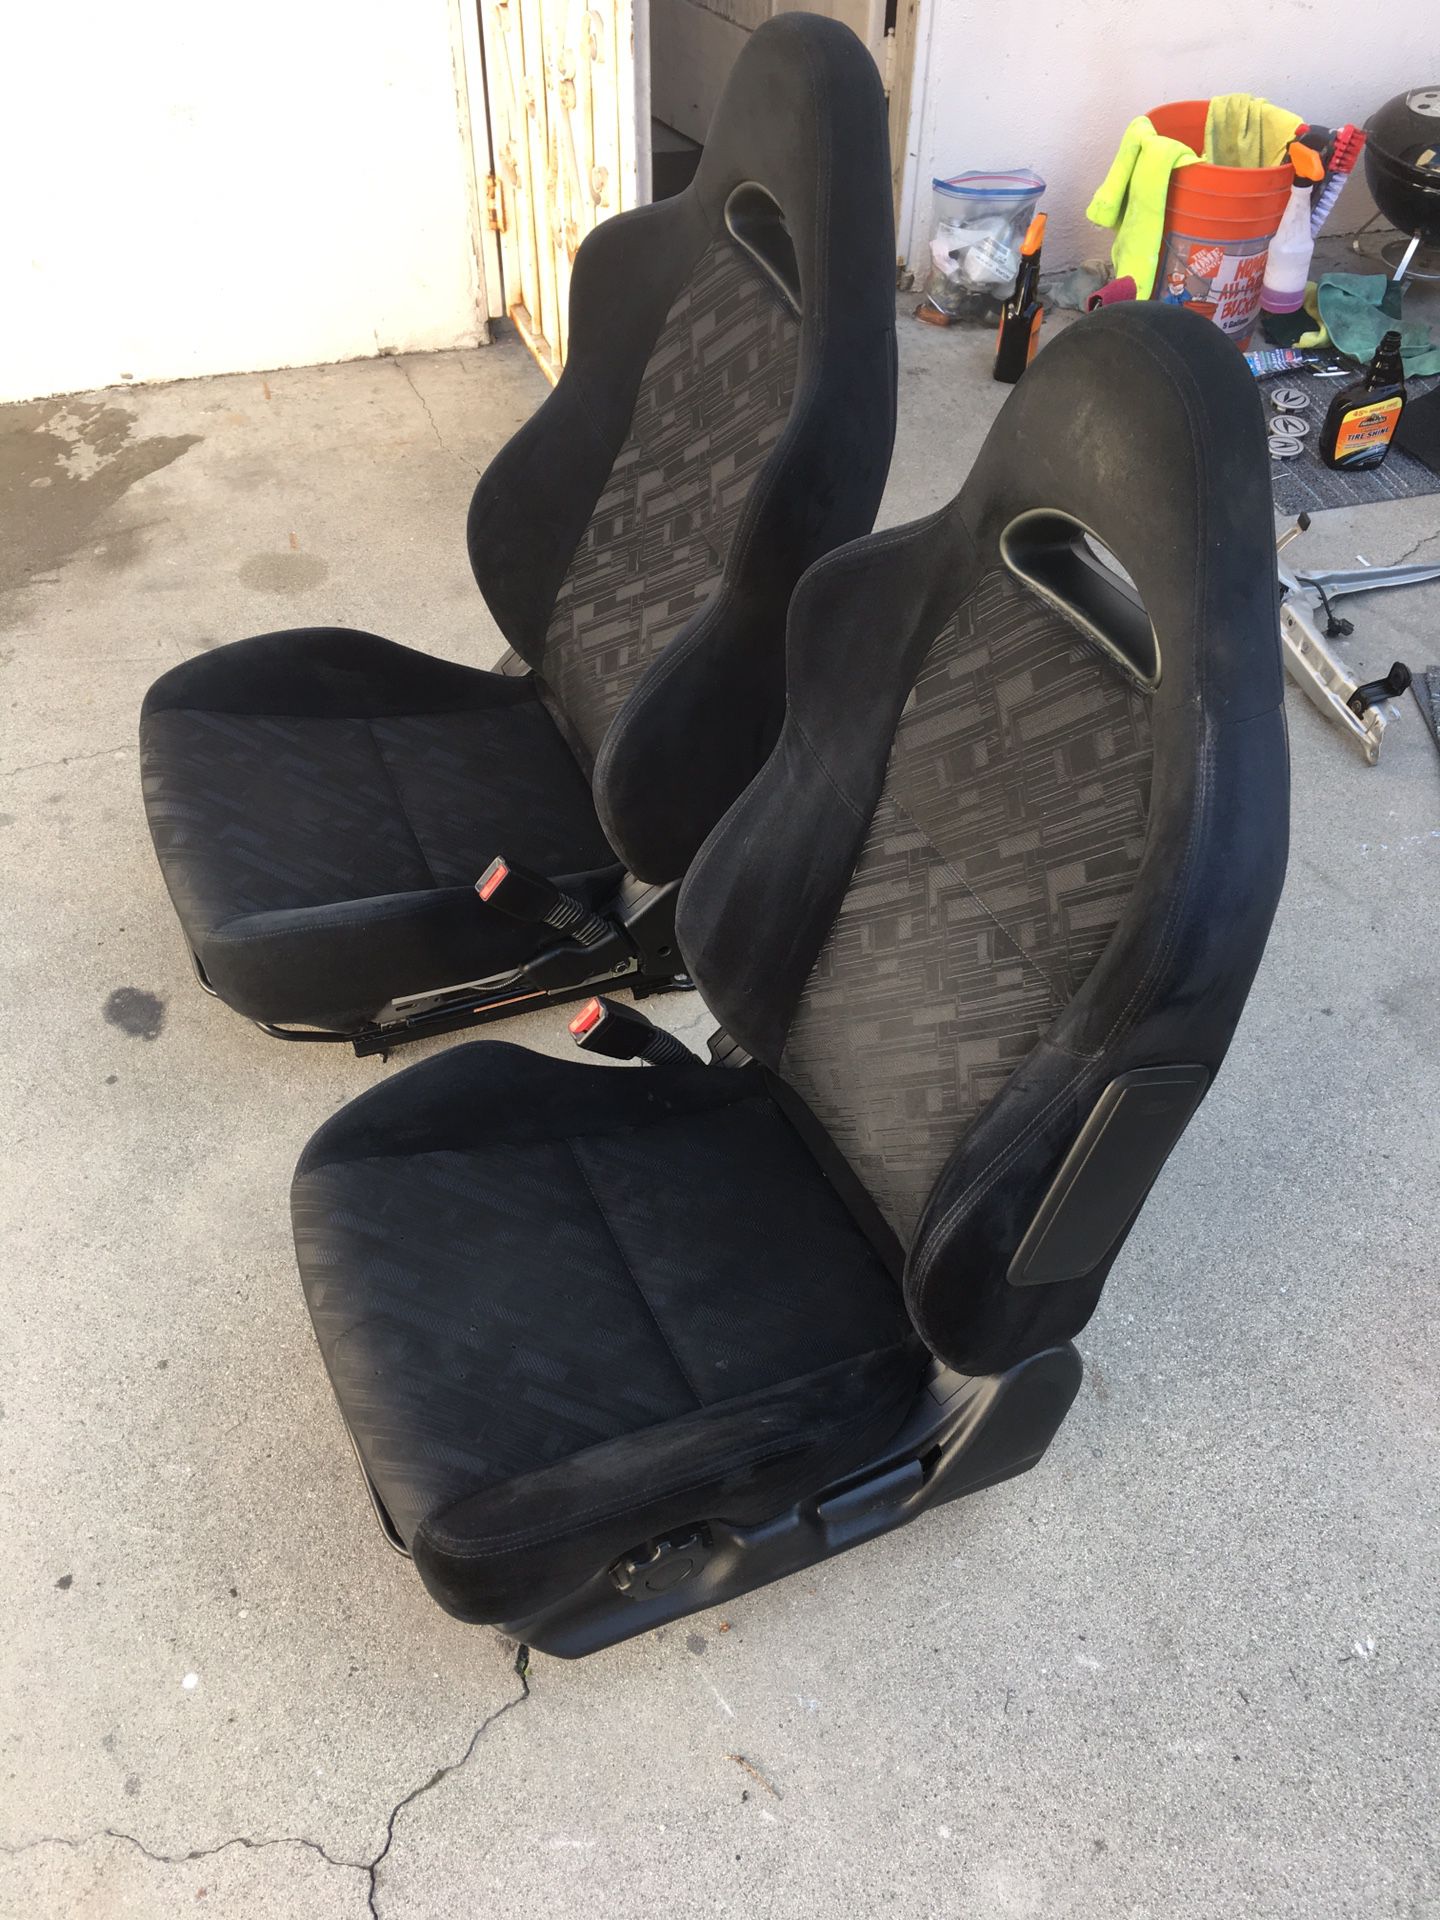 2002-2006 Acura Rsx Dc5 Base /Type S Confetti Style Edition Front Seats Fully intact-Asking $250.00 Solid Black no sun fade